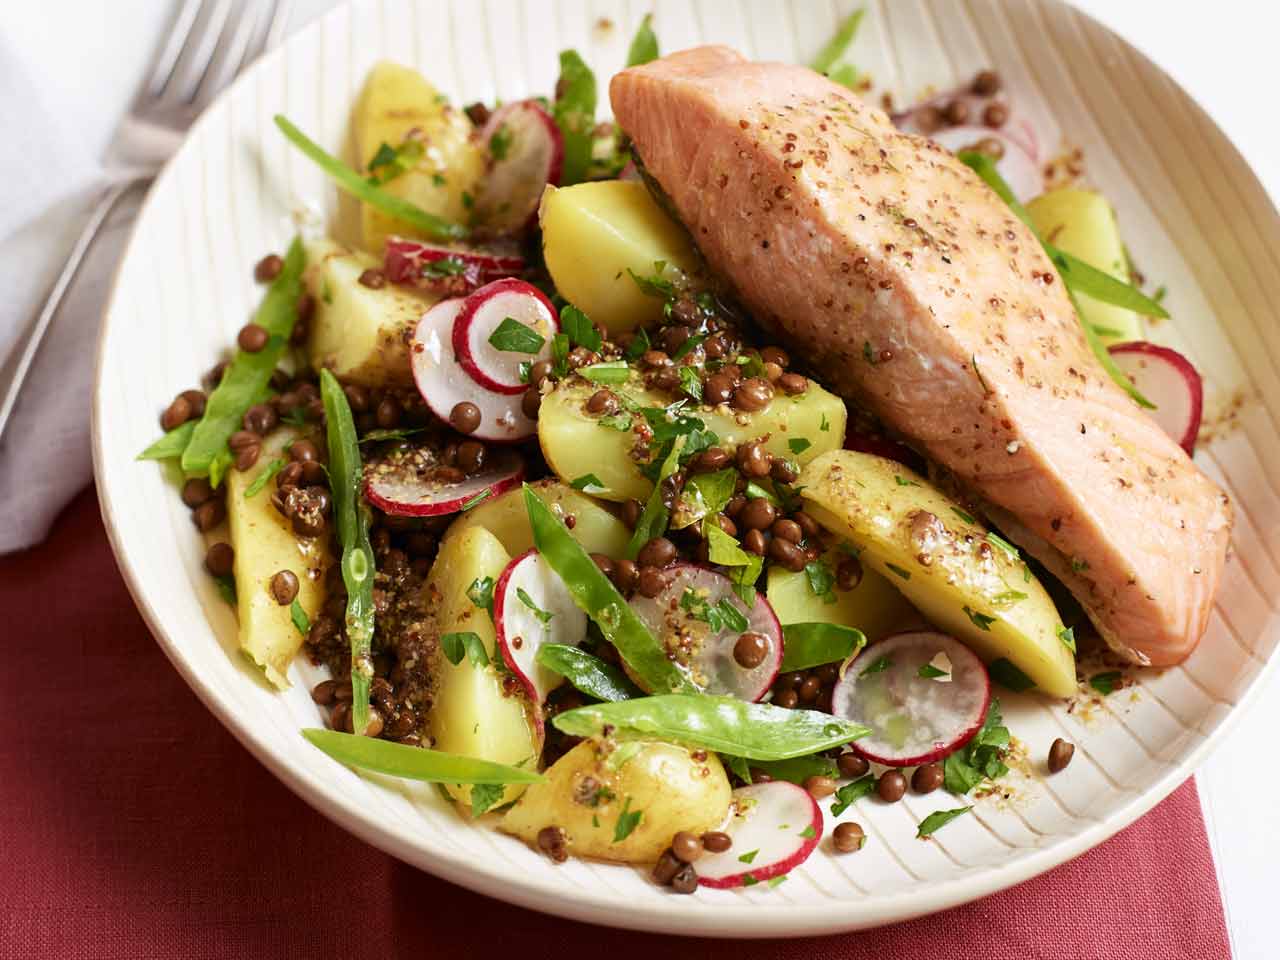 Potato and lentil salad with radish, mange tout with grilled salmon